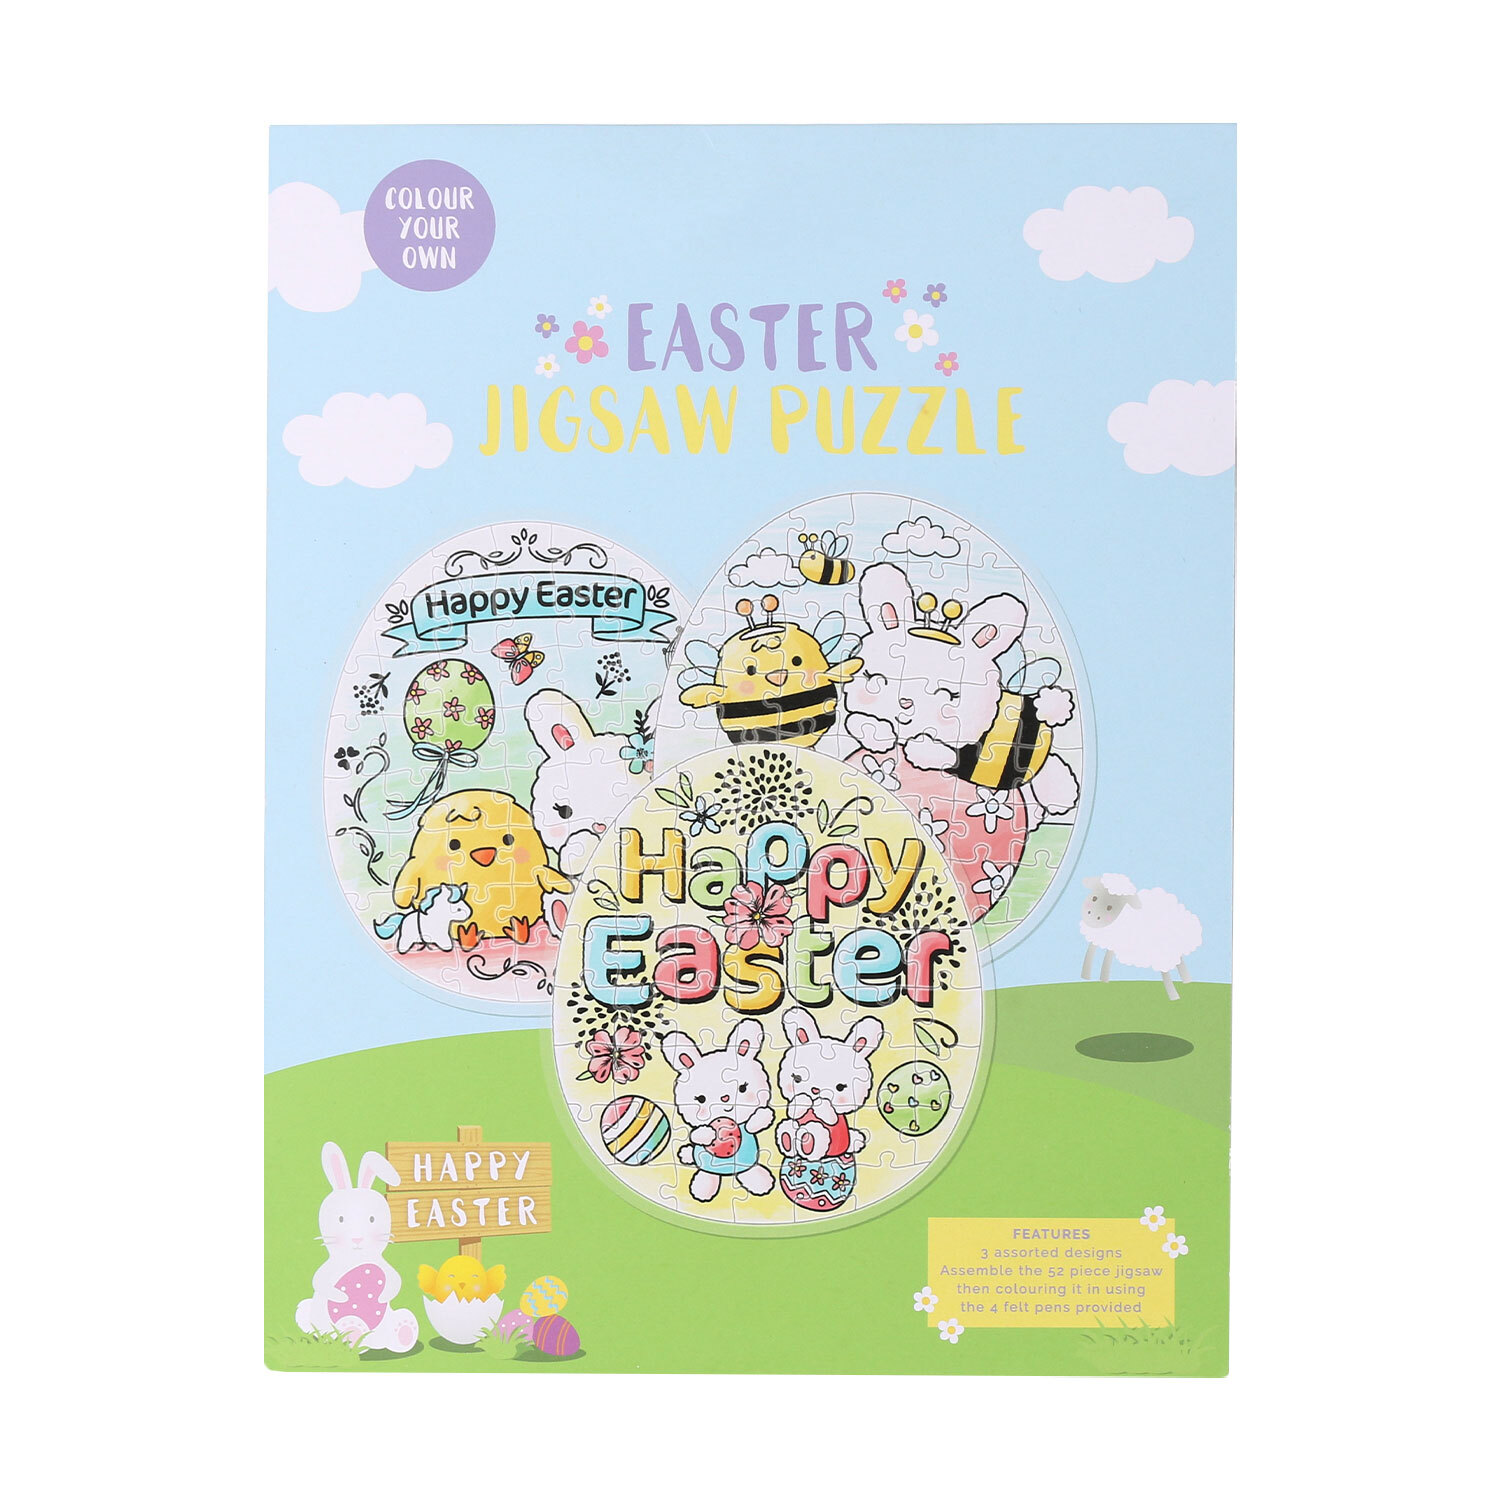 Colour Your Own Easter Jigsaw Puzzle Image